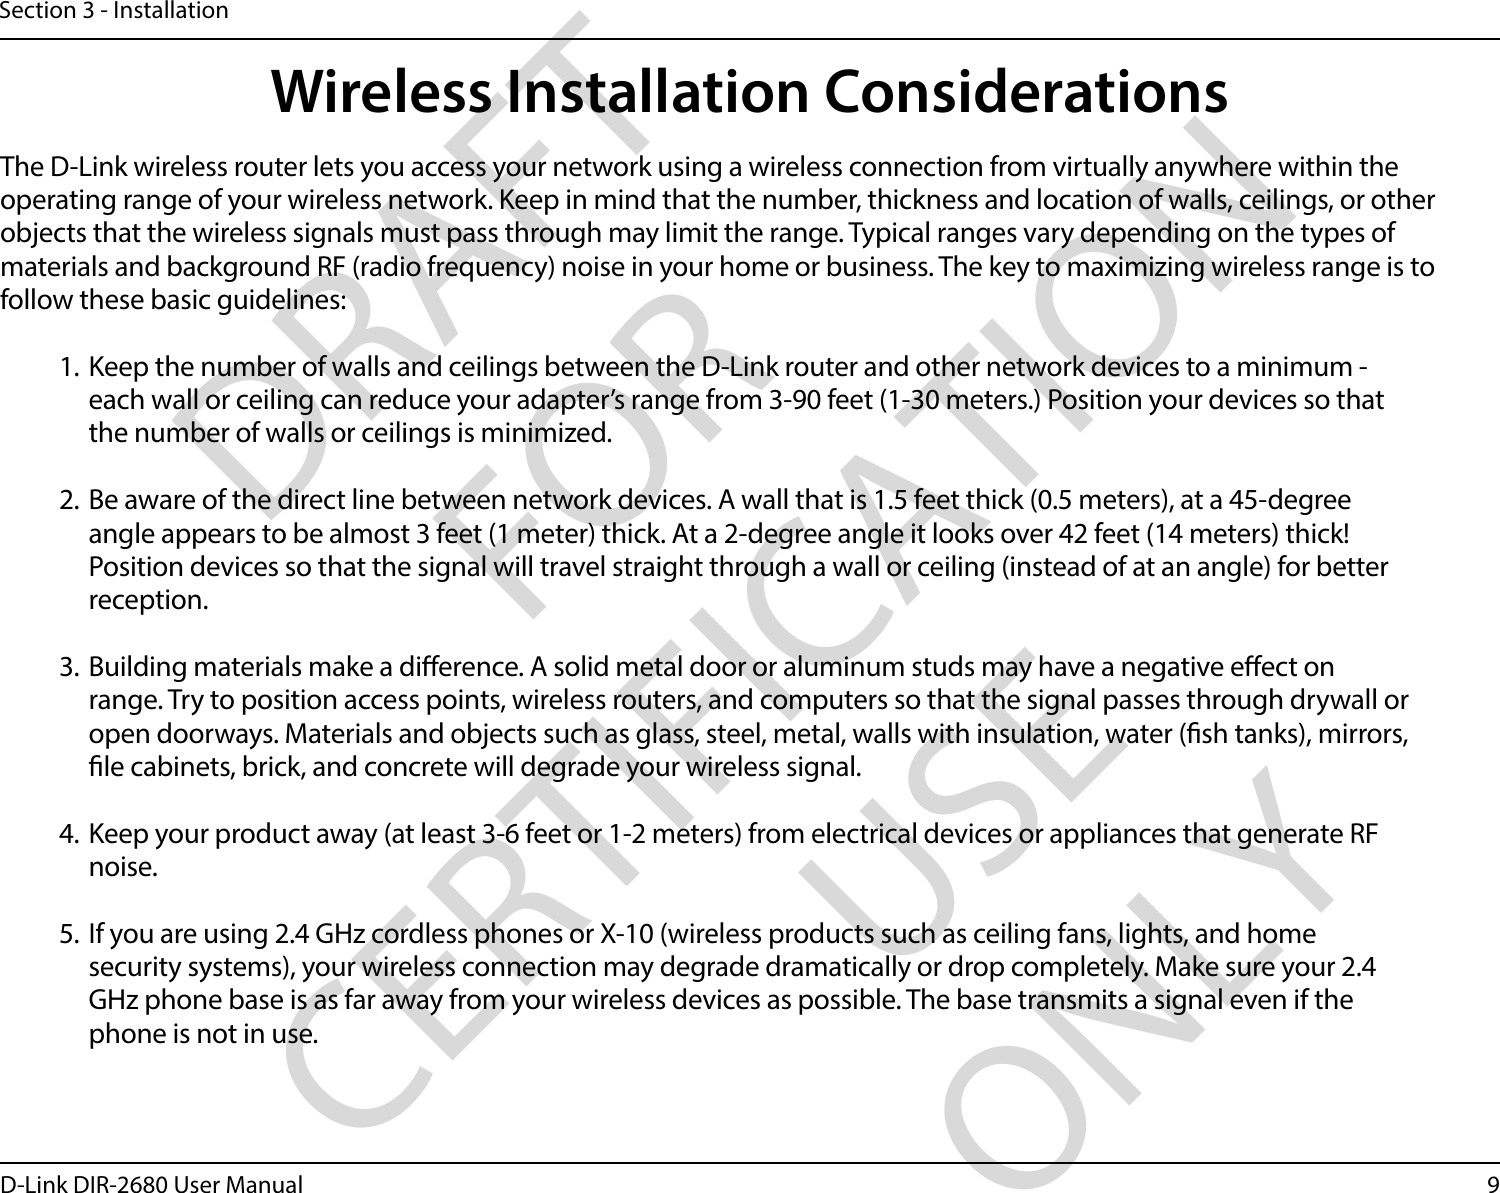 9D-Link DIR-2680 User ManualSection 3 - InstallationWireless Installation ConsiderationsThe D-Link wireless router lets you access your network using a wireless connection from virtually anywhere within the operating range of your wireless network. Keep in mind that the number, thickness and location of walls, ceilings, or other objects that the wireless signals must pass through may limit the range. Typical ranges vary depending on the types of materials and background RF (radio frequency) noise in your home or business. The key to maximizing wireless range is to follow these basic guidelines:1. Keep the number of walls and ceilings between the D-Link router and other network devices to a minimum - each wall or ceiling can reduce your adapter’s range from 3-90 feet (1-30 meters.) Position your devices so that the number of walls or ceilings is minimized.2. Be aware of the direct line between network devices. A wall that is 1.5 feet thick (0.5 meters), at a 45-degree angle appears to be almost 3 feet (1 meter) thick. At a 2-degree angle it looks over 42 feet (14 meters) thick! Position devices so that the signal will travel straight through a wall or ceiling (instead of at an angle) for better reception.3. Building materials make a dierence. A solid metal door or aluminum studs may have a negative eect on range. Try to position access points, wireless routers, and computers so that the signal passes through drywall or open doorways. Materials and objects such as glass, steel, metal, walls with insulation, water (sh tanks), mirrors, le cabinets, brick, and concrete will degrade your wireless signal.4. Keep your product away (at least 3-6 feet or 1-2 meters) from electrical devices or appliances that generate RF noise.5. If you are using 2.4 GHz cordless phones or X-10 (wireless products such as ceiling fans, lights, and home security systems), your wireless connection may degrade dramatically or drop completely. Make sure your 2.4 GHz phone base is as far away from your wireless devices as possible. The base transmits a signal even if the phone is not in use.DRAFT FOR CERTIFICATION USE ONLY